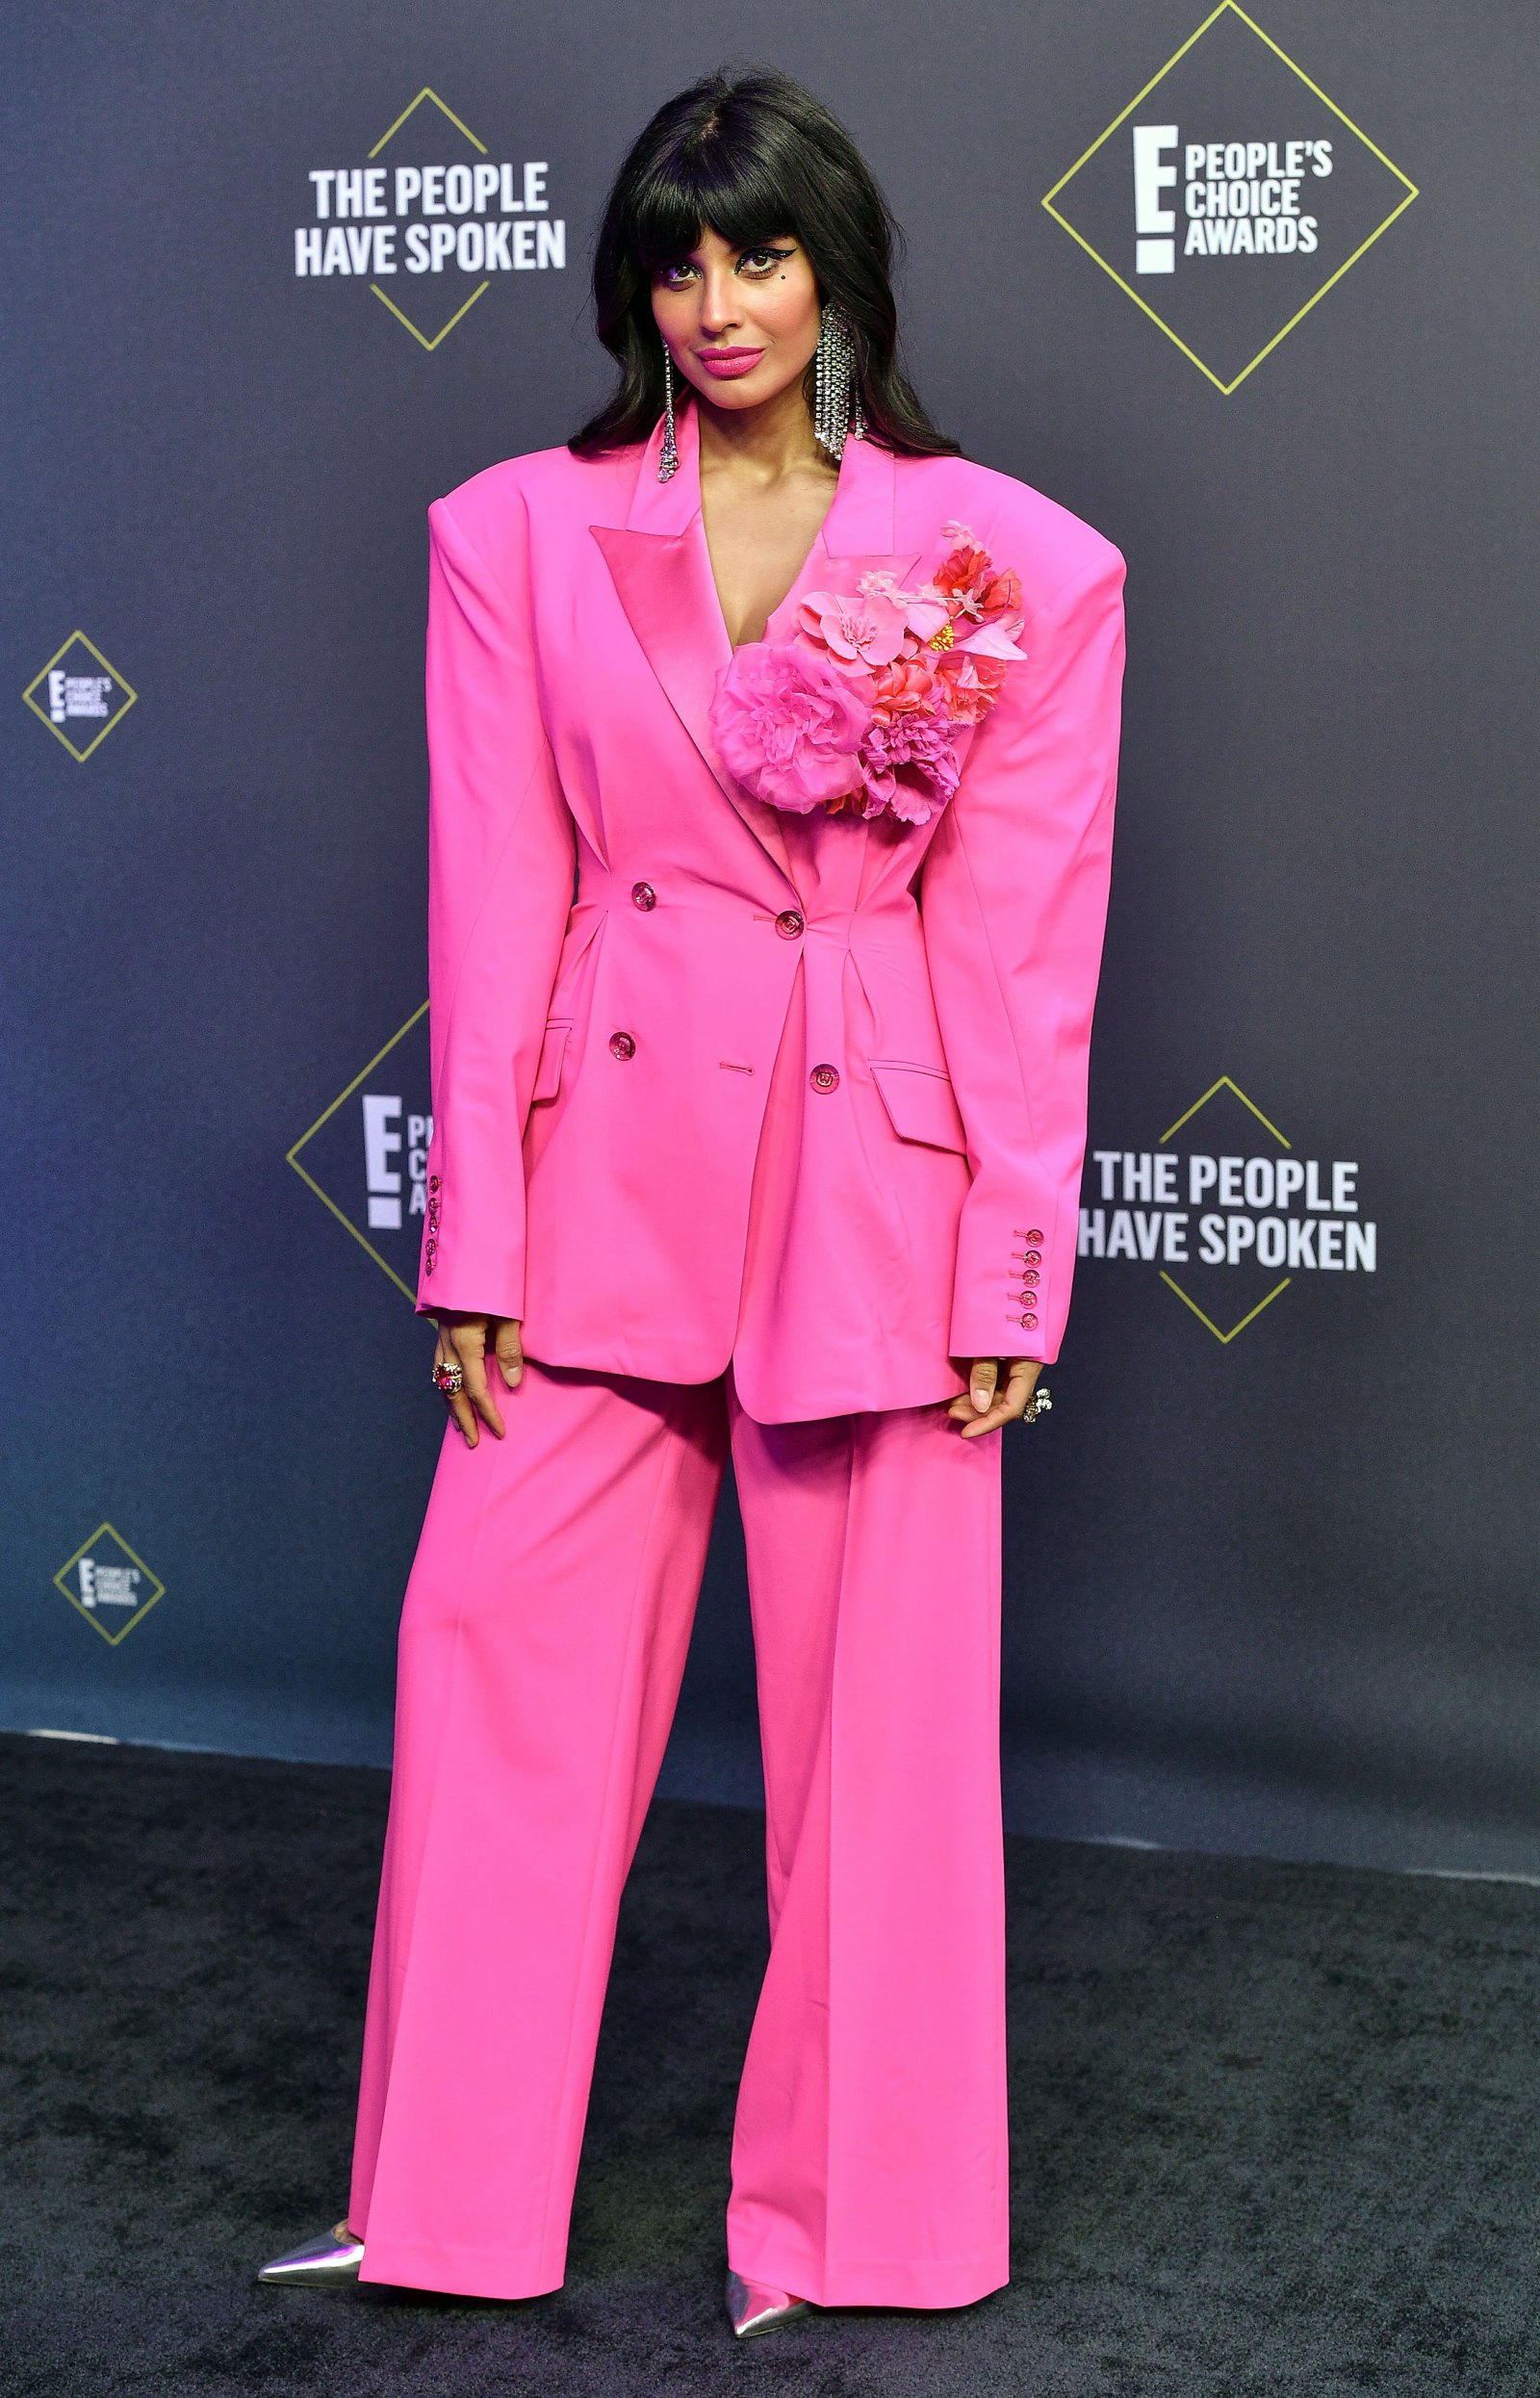 People's Choice Awards 2020: Celebrity Red Carpet Fashion, Style